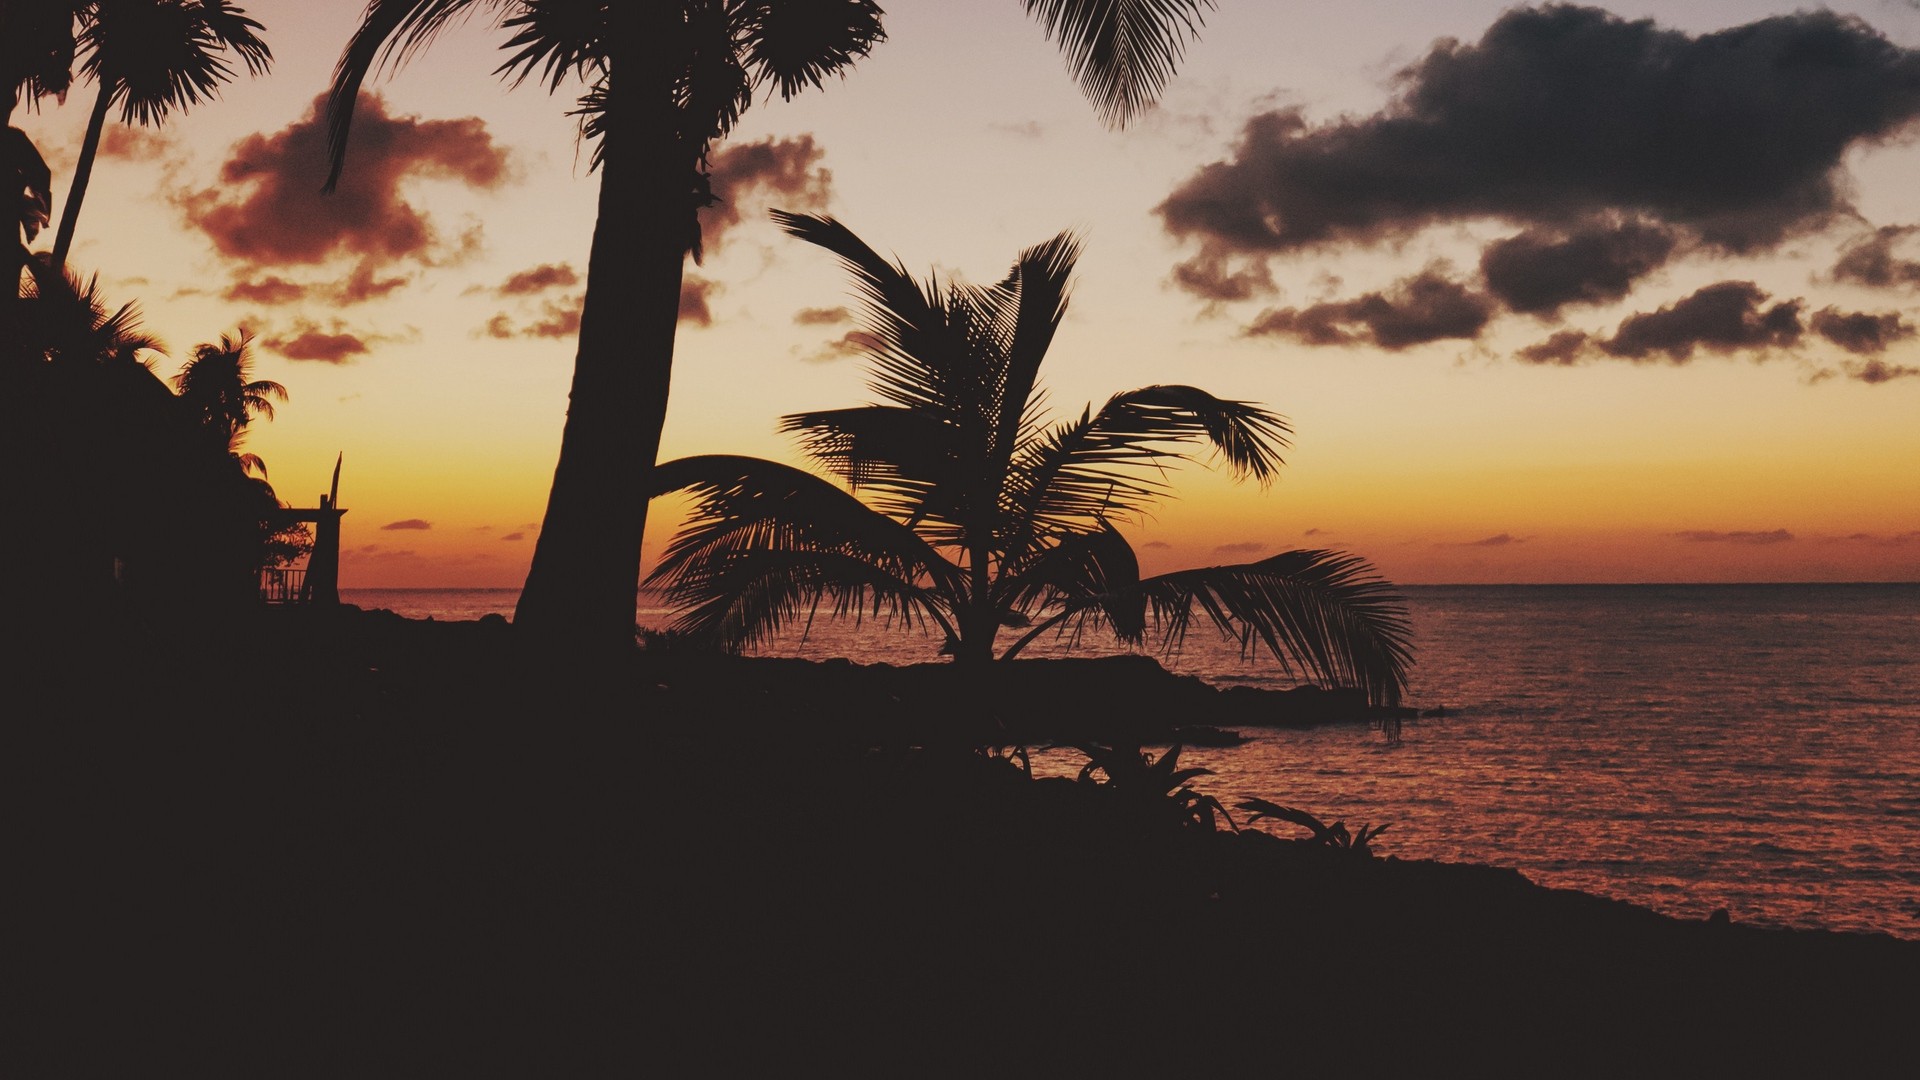 1920x1080 wallpapers: palm trees, tropics, sunset, branches (image)